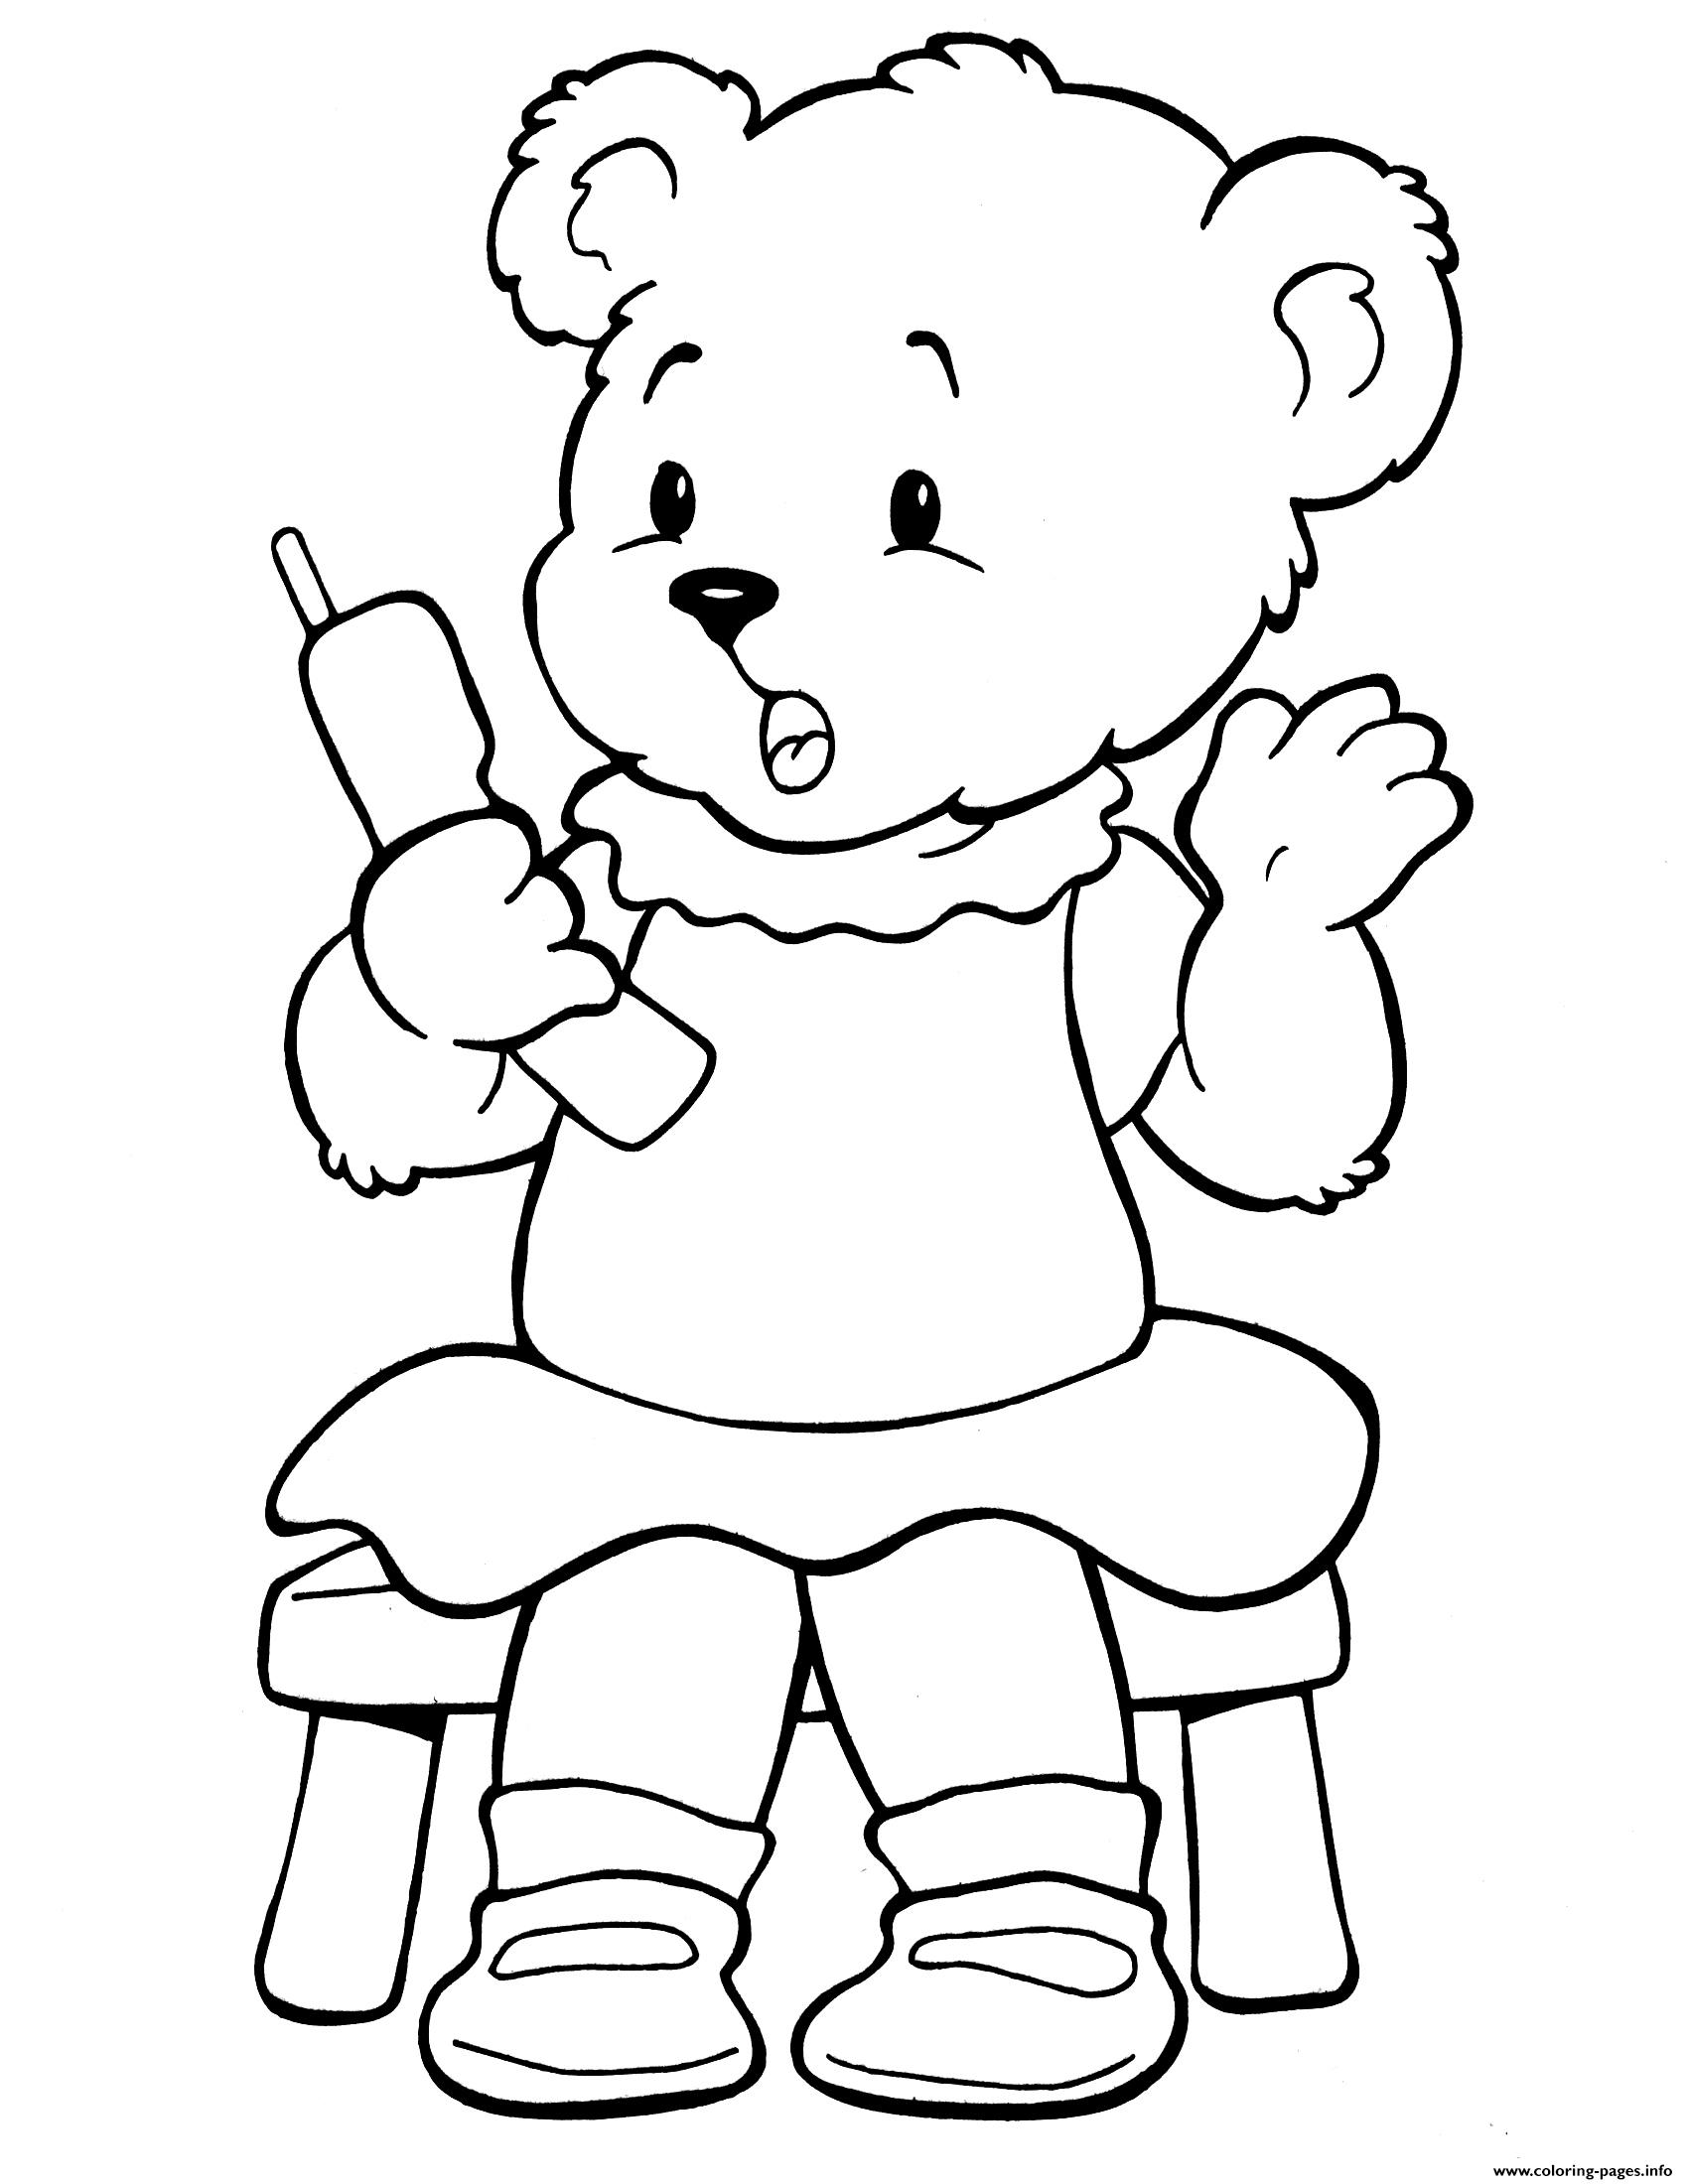 Teddy Bear On The Phone coloring pages